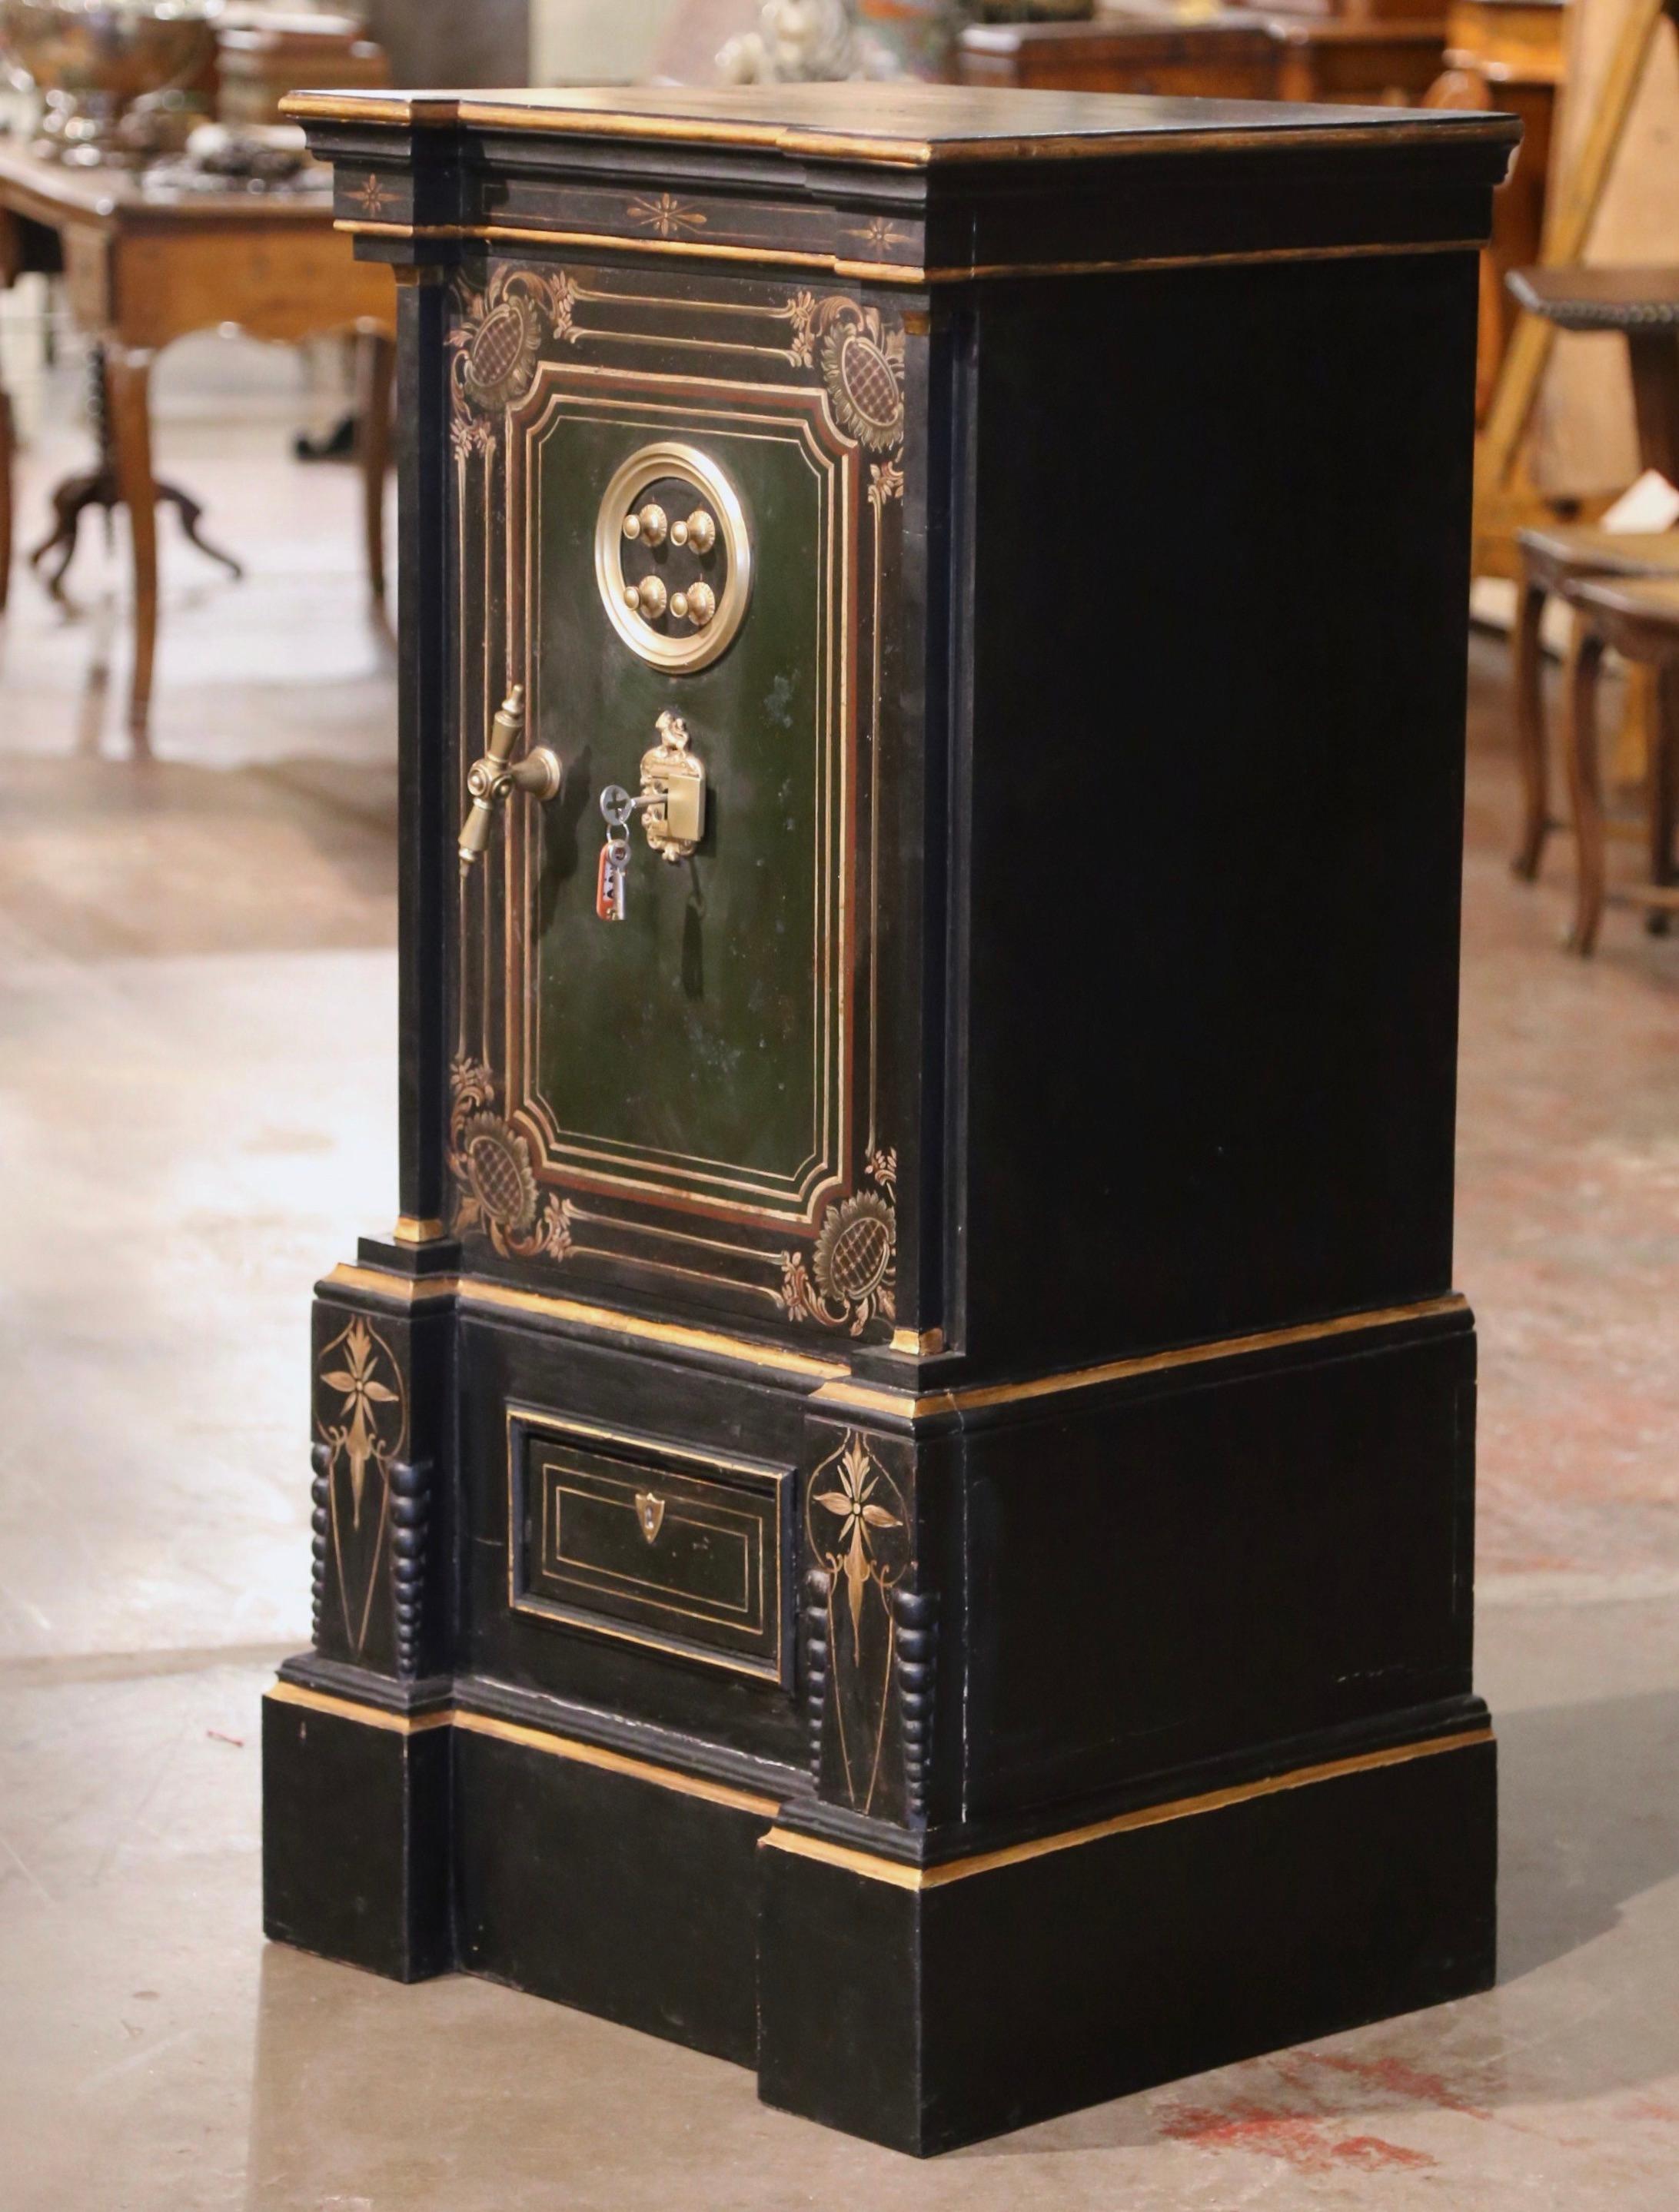 Keep all your valuables and jewelry safe in this elegant, antique iron safe. Crafted in Spain circa 1870, the strongbox features the original black color embellished with hand painted gilt floral decor. The massive safe has an impressive locking